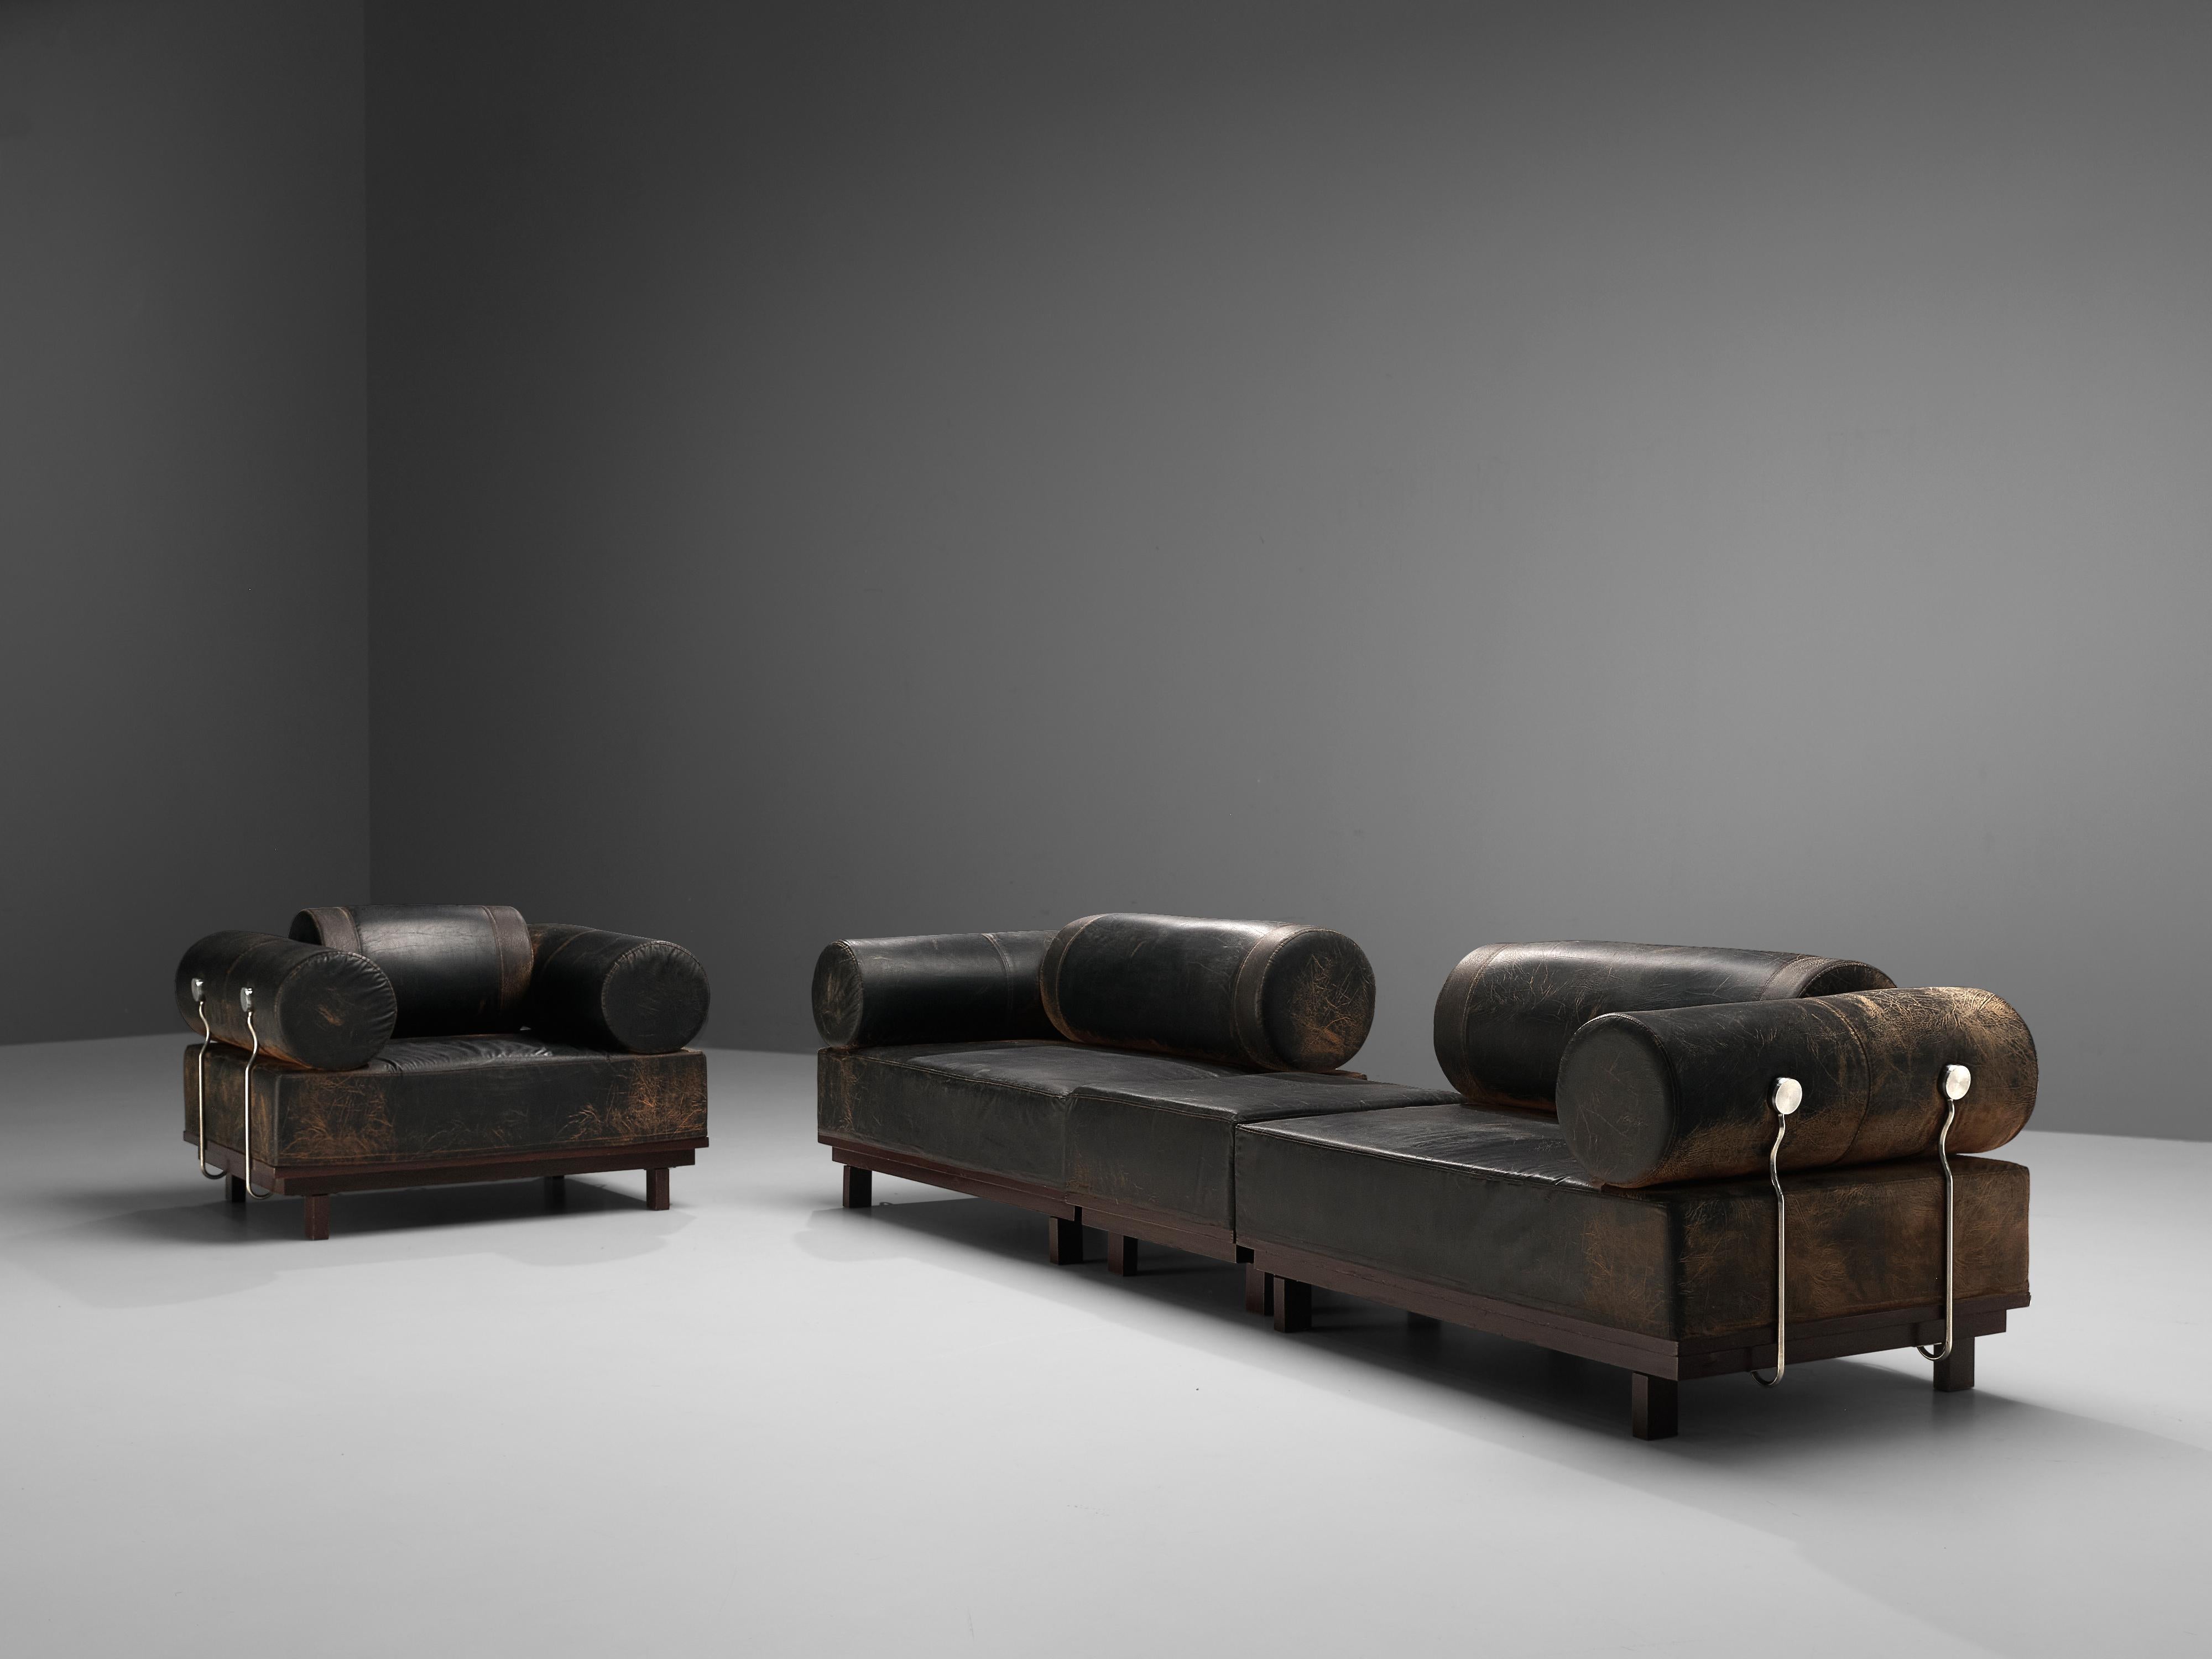 Bulky Modular Sofa in Leatherette and Metal Details 7